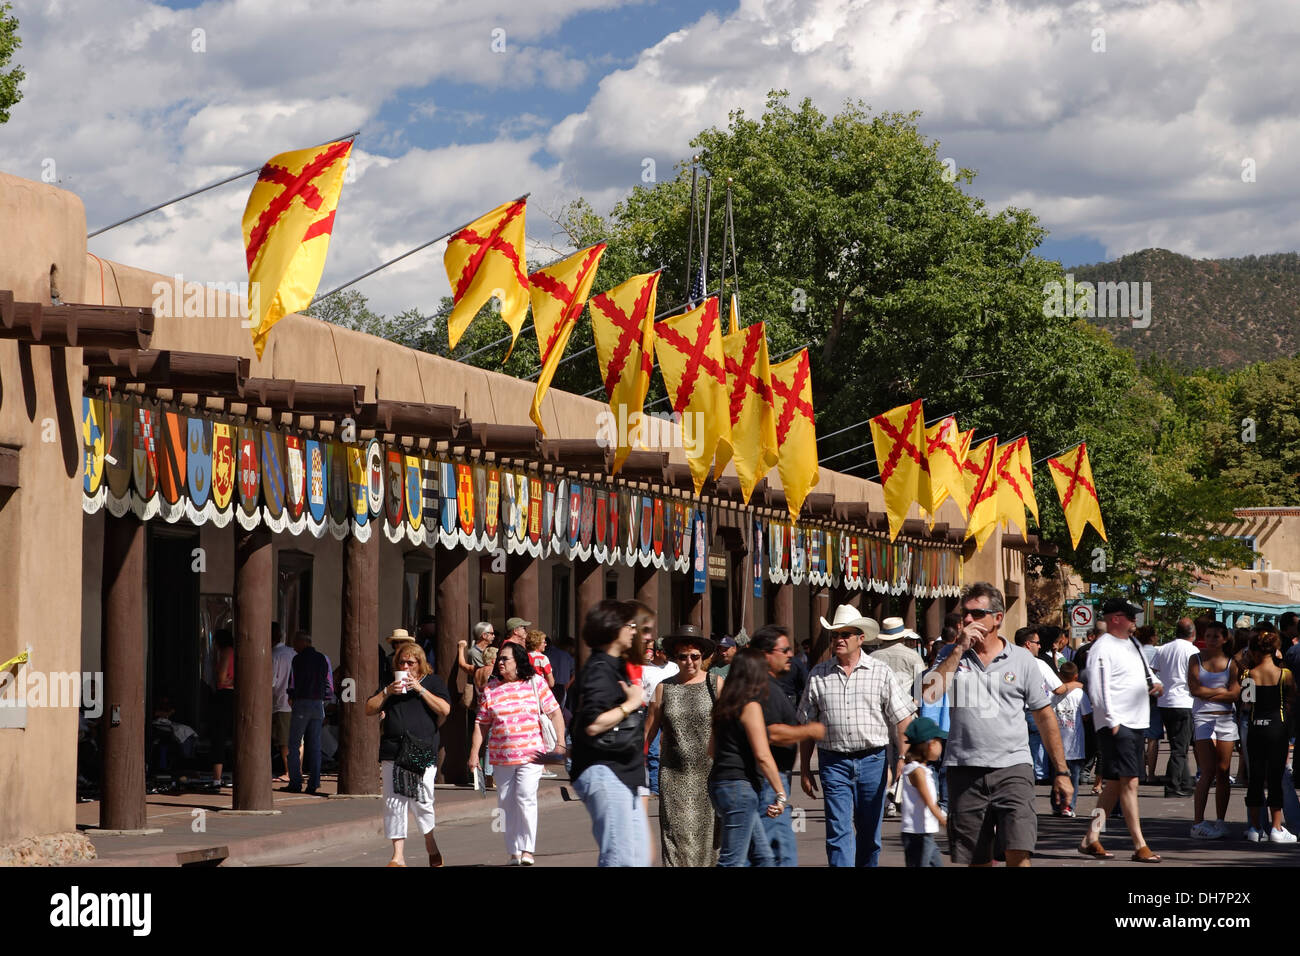 Palace of the Governors with flags and people, Santa Fe, New Mexico USA Stock Photo